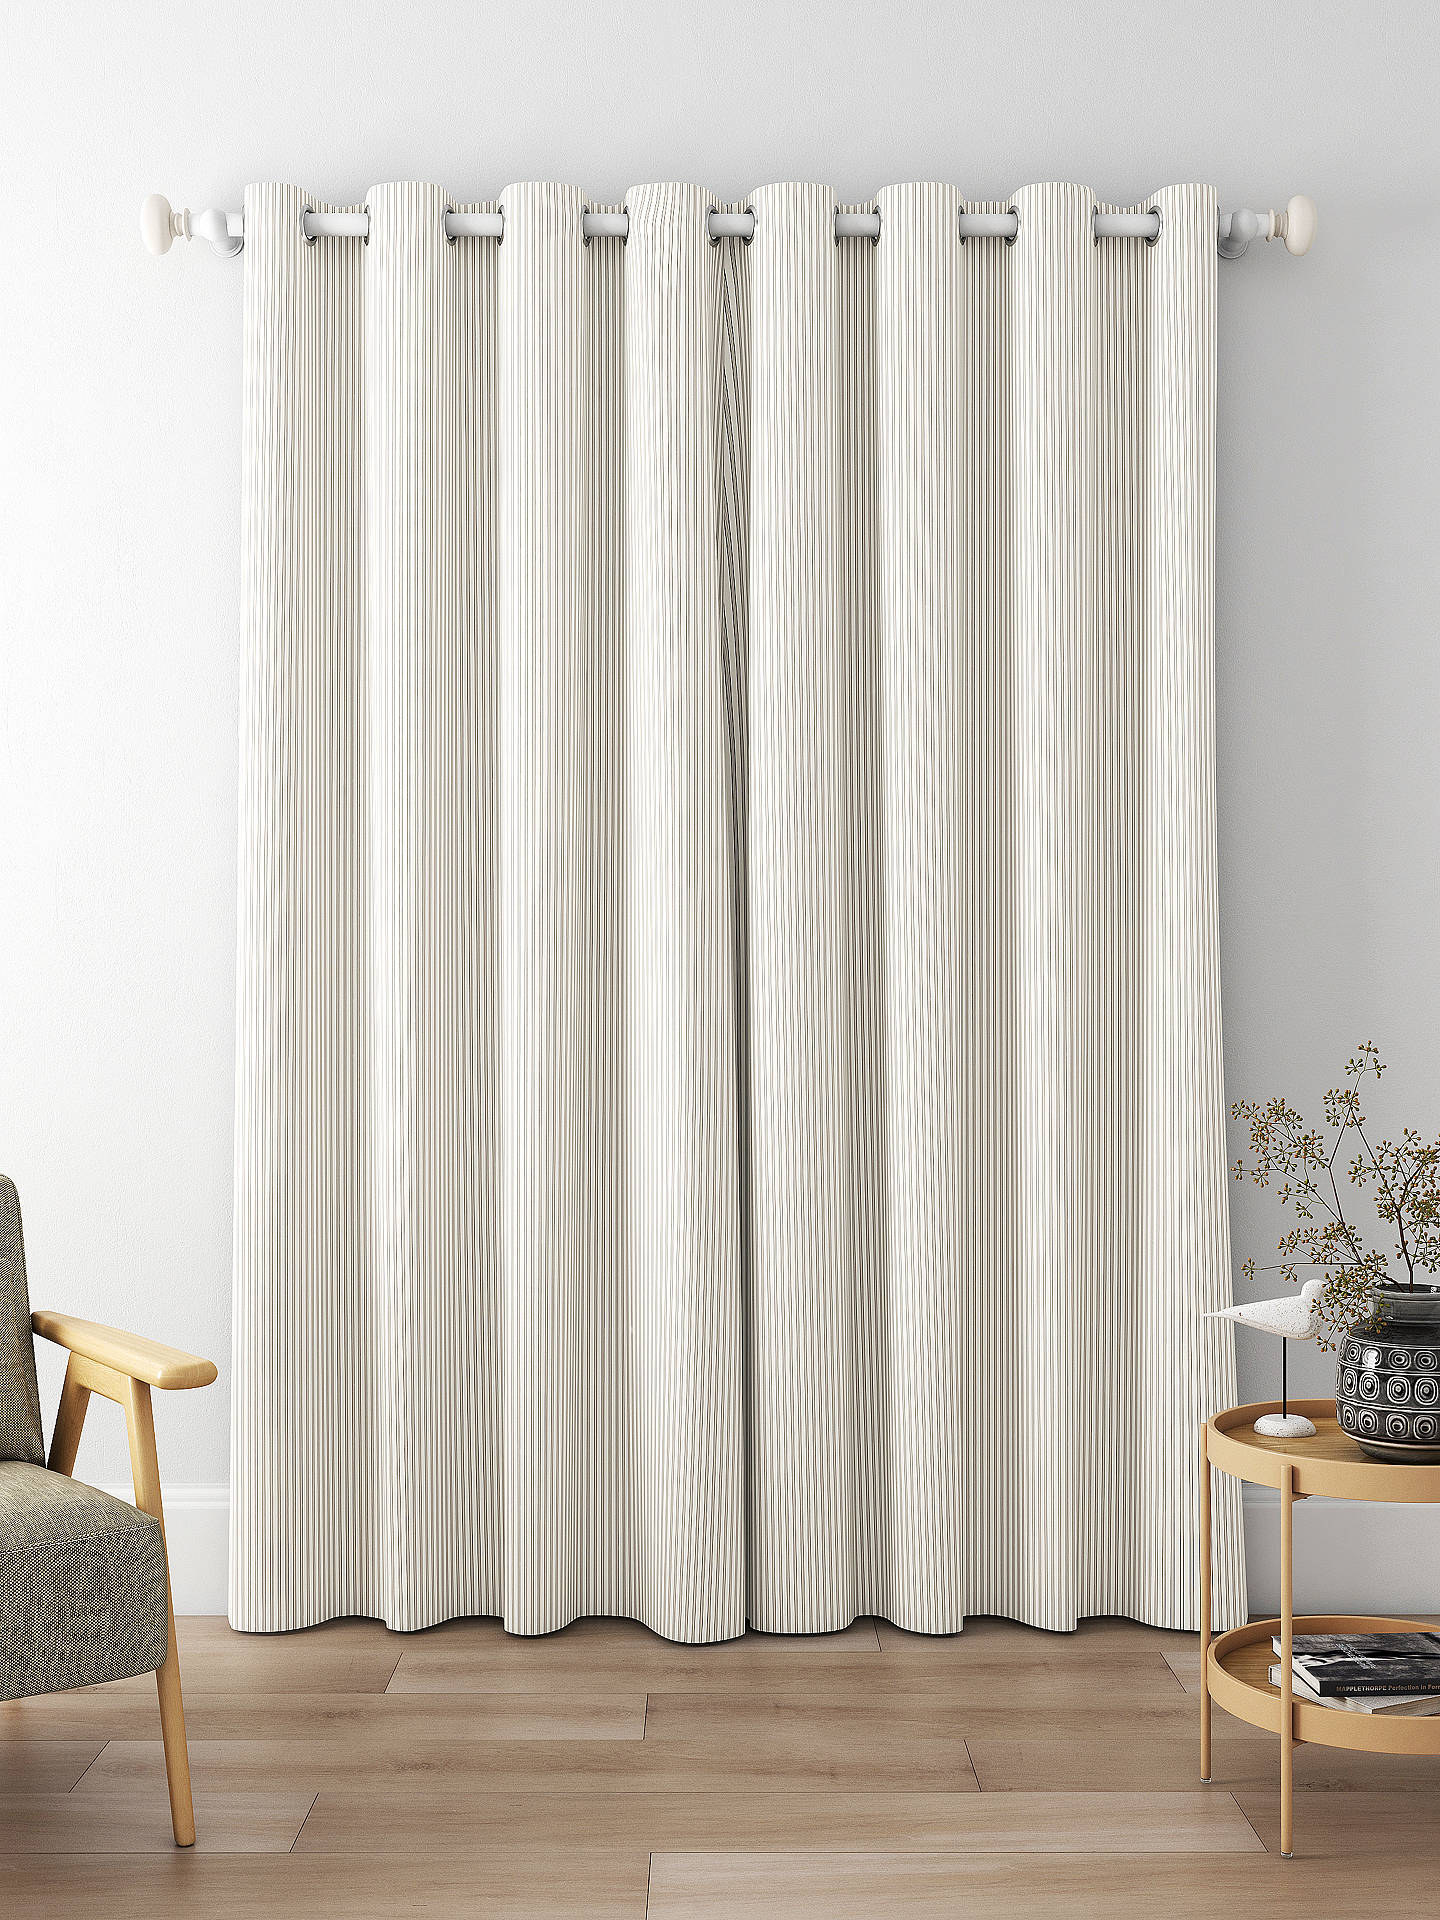 Clarke & Clarke Edison Made to Measure Curtains, Charcoal/Natural